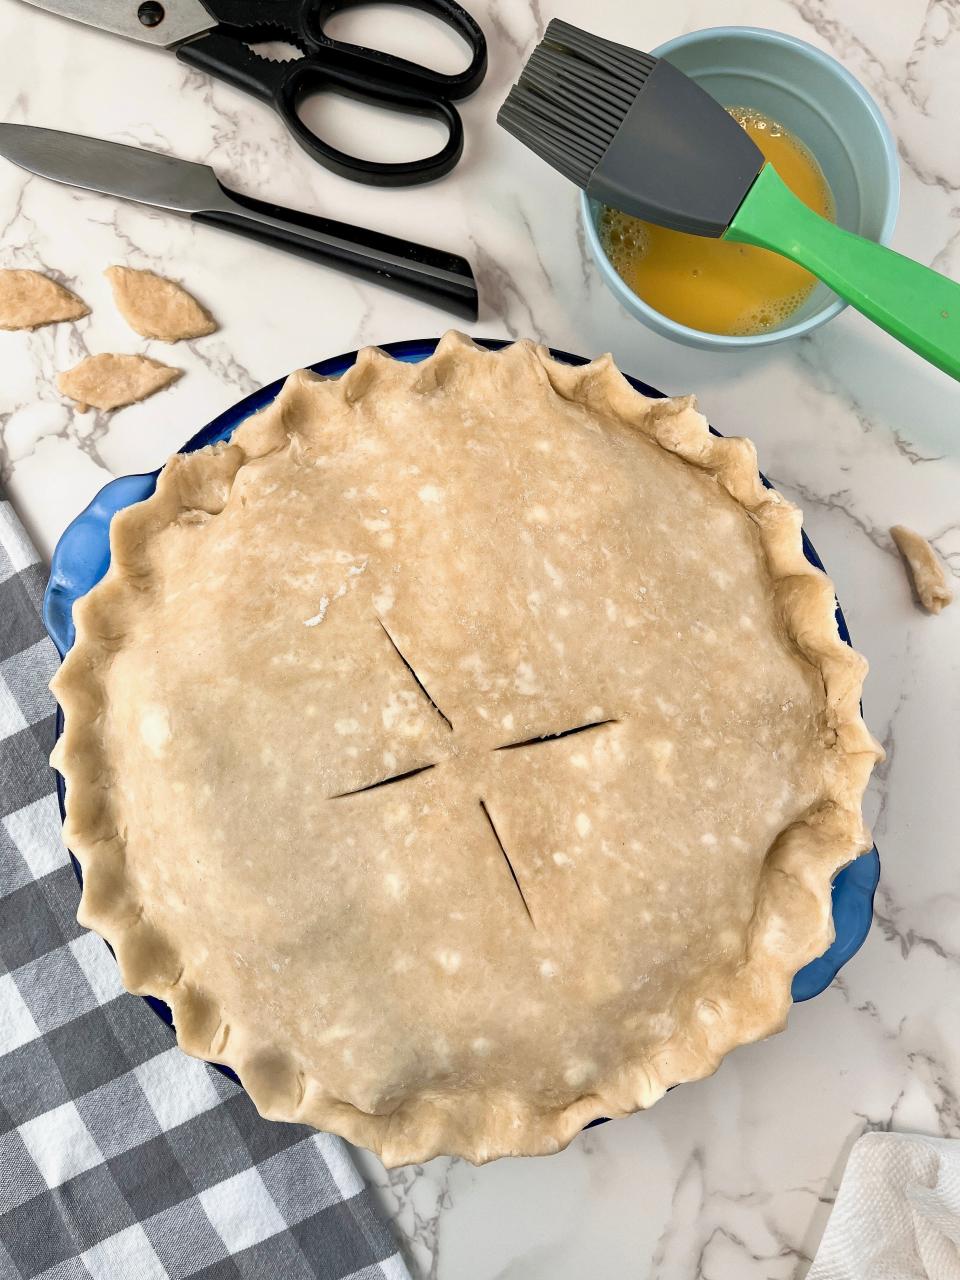 Use your second crust to cover the pie. Be sure to cut air vents in the top.